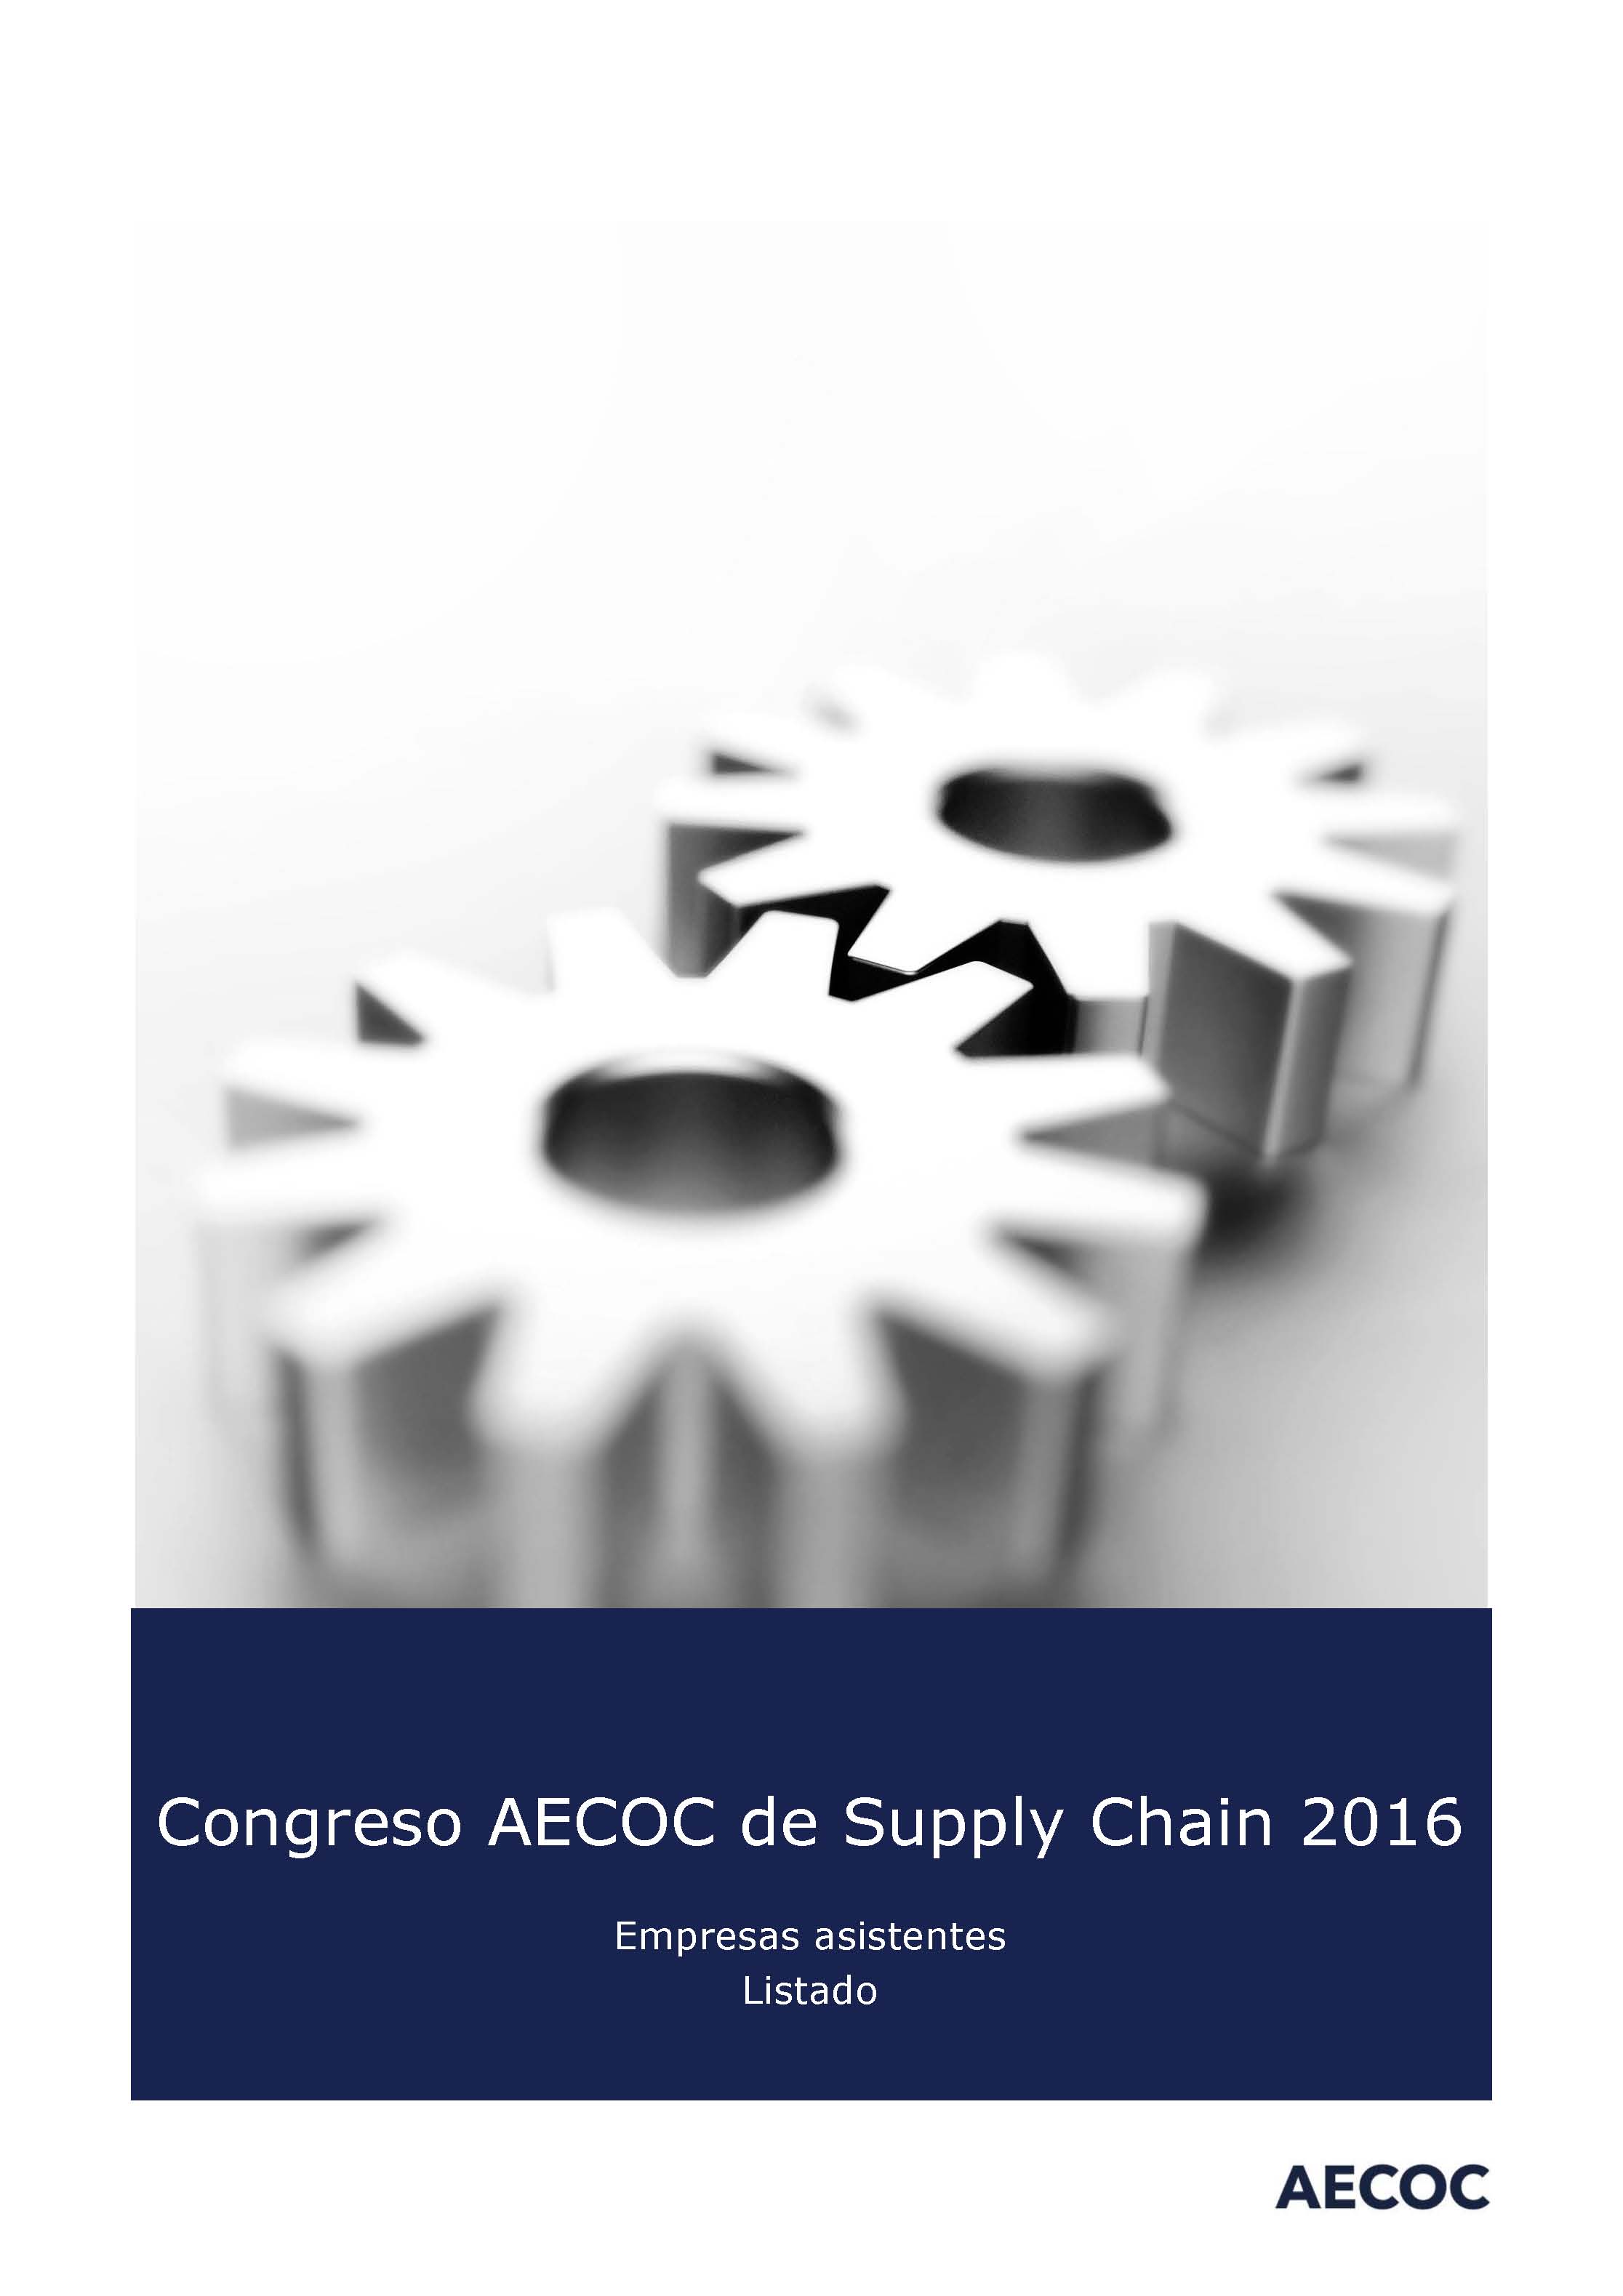 Asistentes-Supply-Chain-2016-1